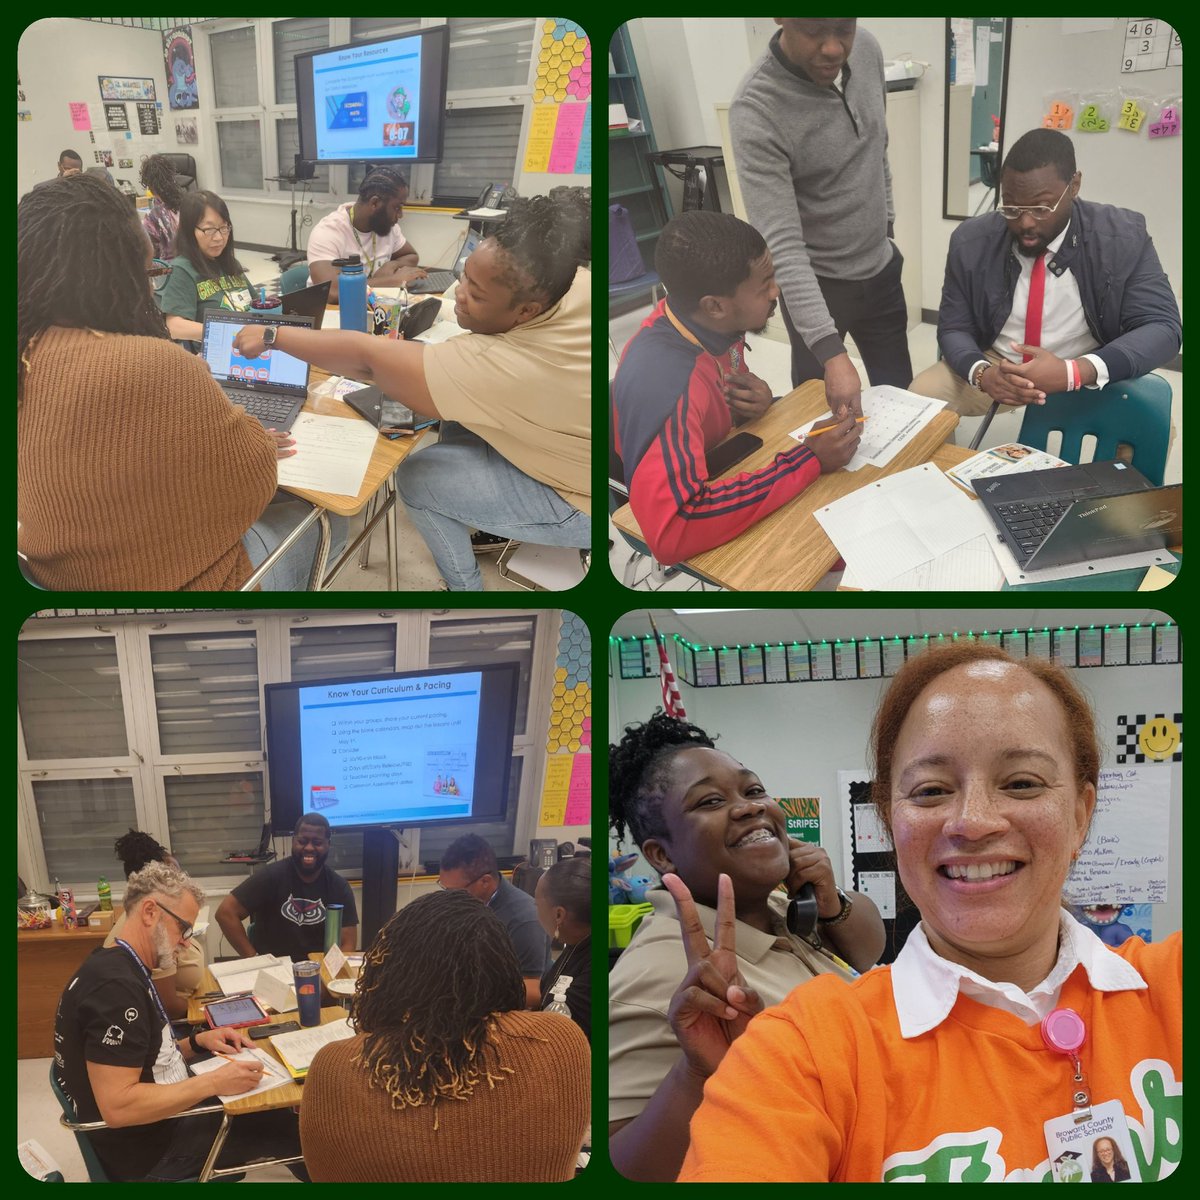 When time and chance meet up, greatness happens. What an amazing Day 1 of our Vertical Math Team mtg today in the Ely Zone! Holding student success firmly #MathExcellence @BrowardMath @BCPSNorthRegion @blanche_ely @Tav_Williams @clms1871 @PBMSNation @BCPSSantana @stoddlapace